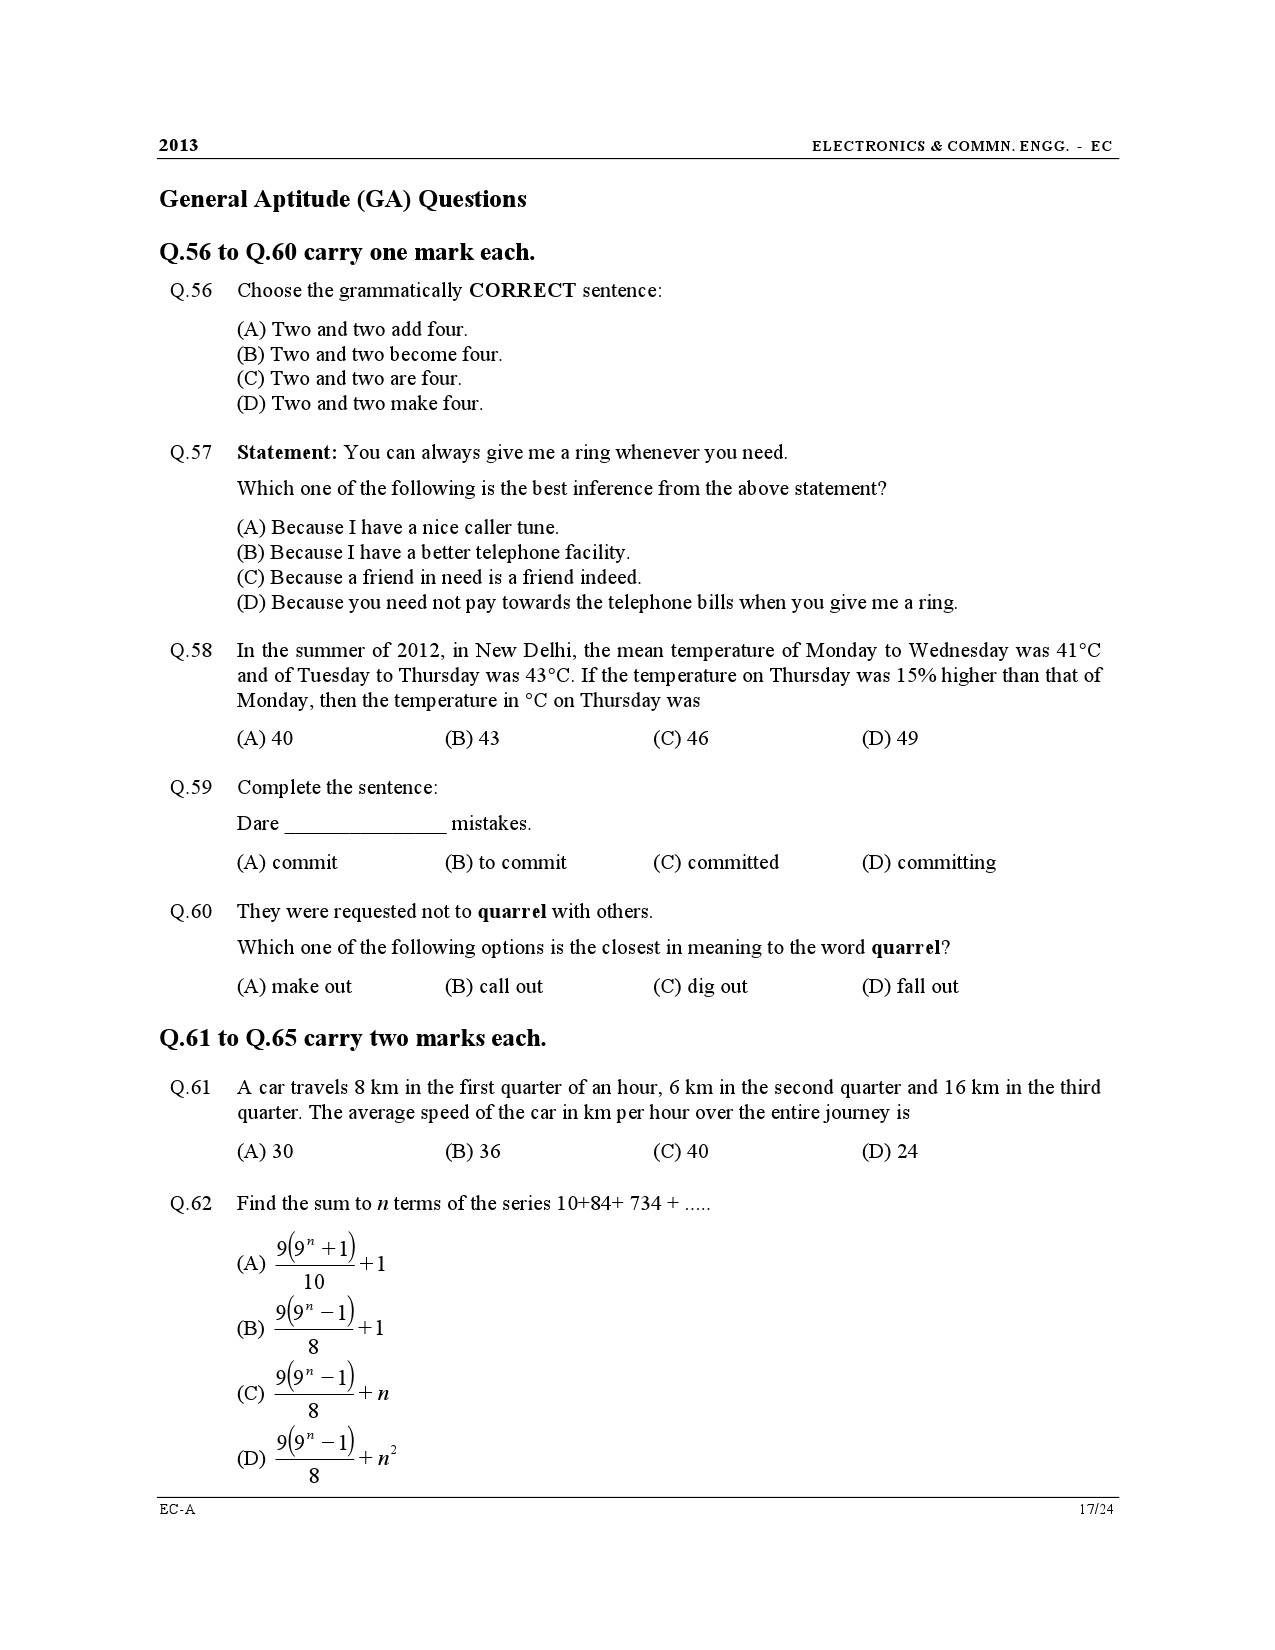 GATE Exam Question Paper 2013 Electronics and Communication Engineering 17